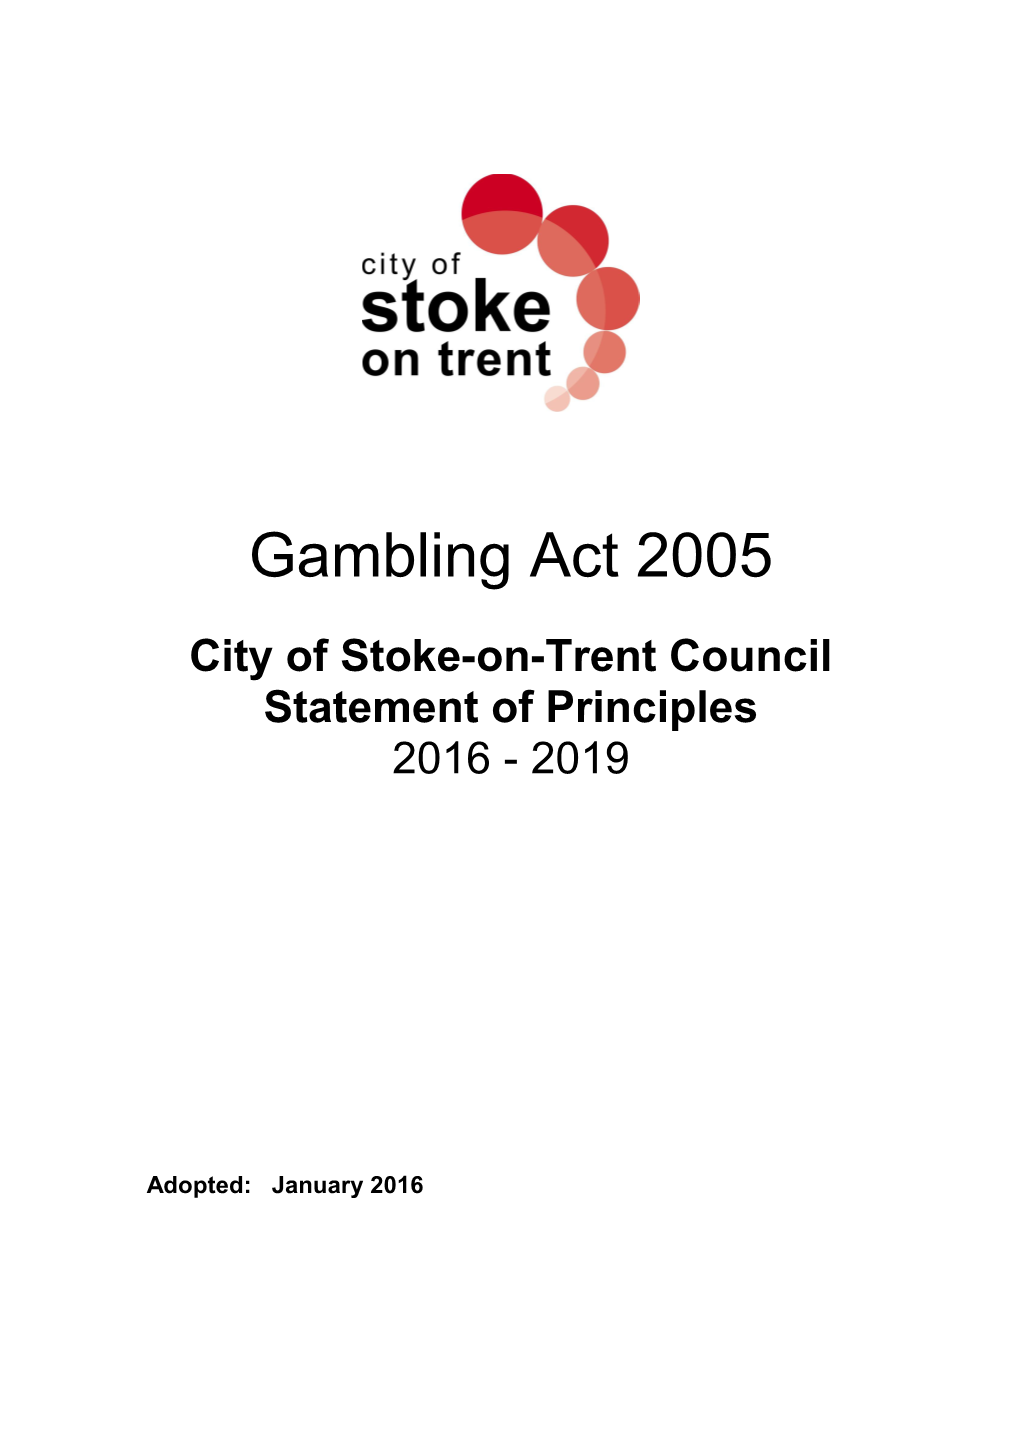 City of Stoke-On-Trent Council